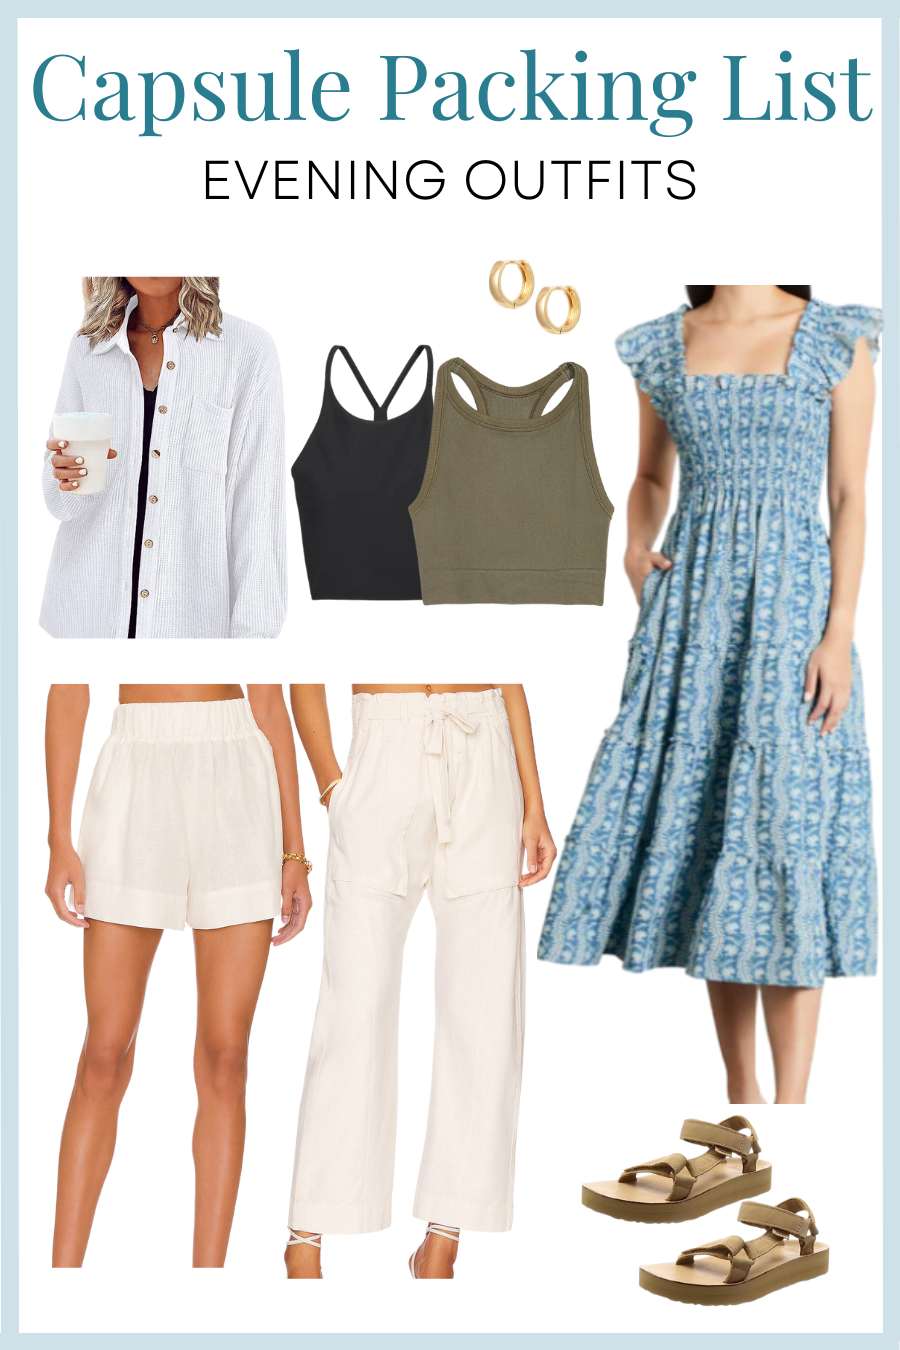 Summer capsule packing list evening outfits